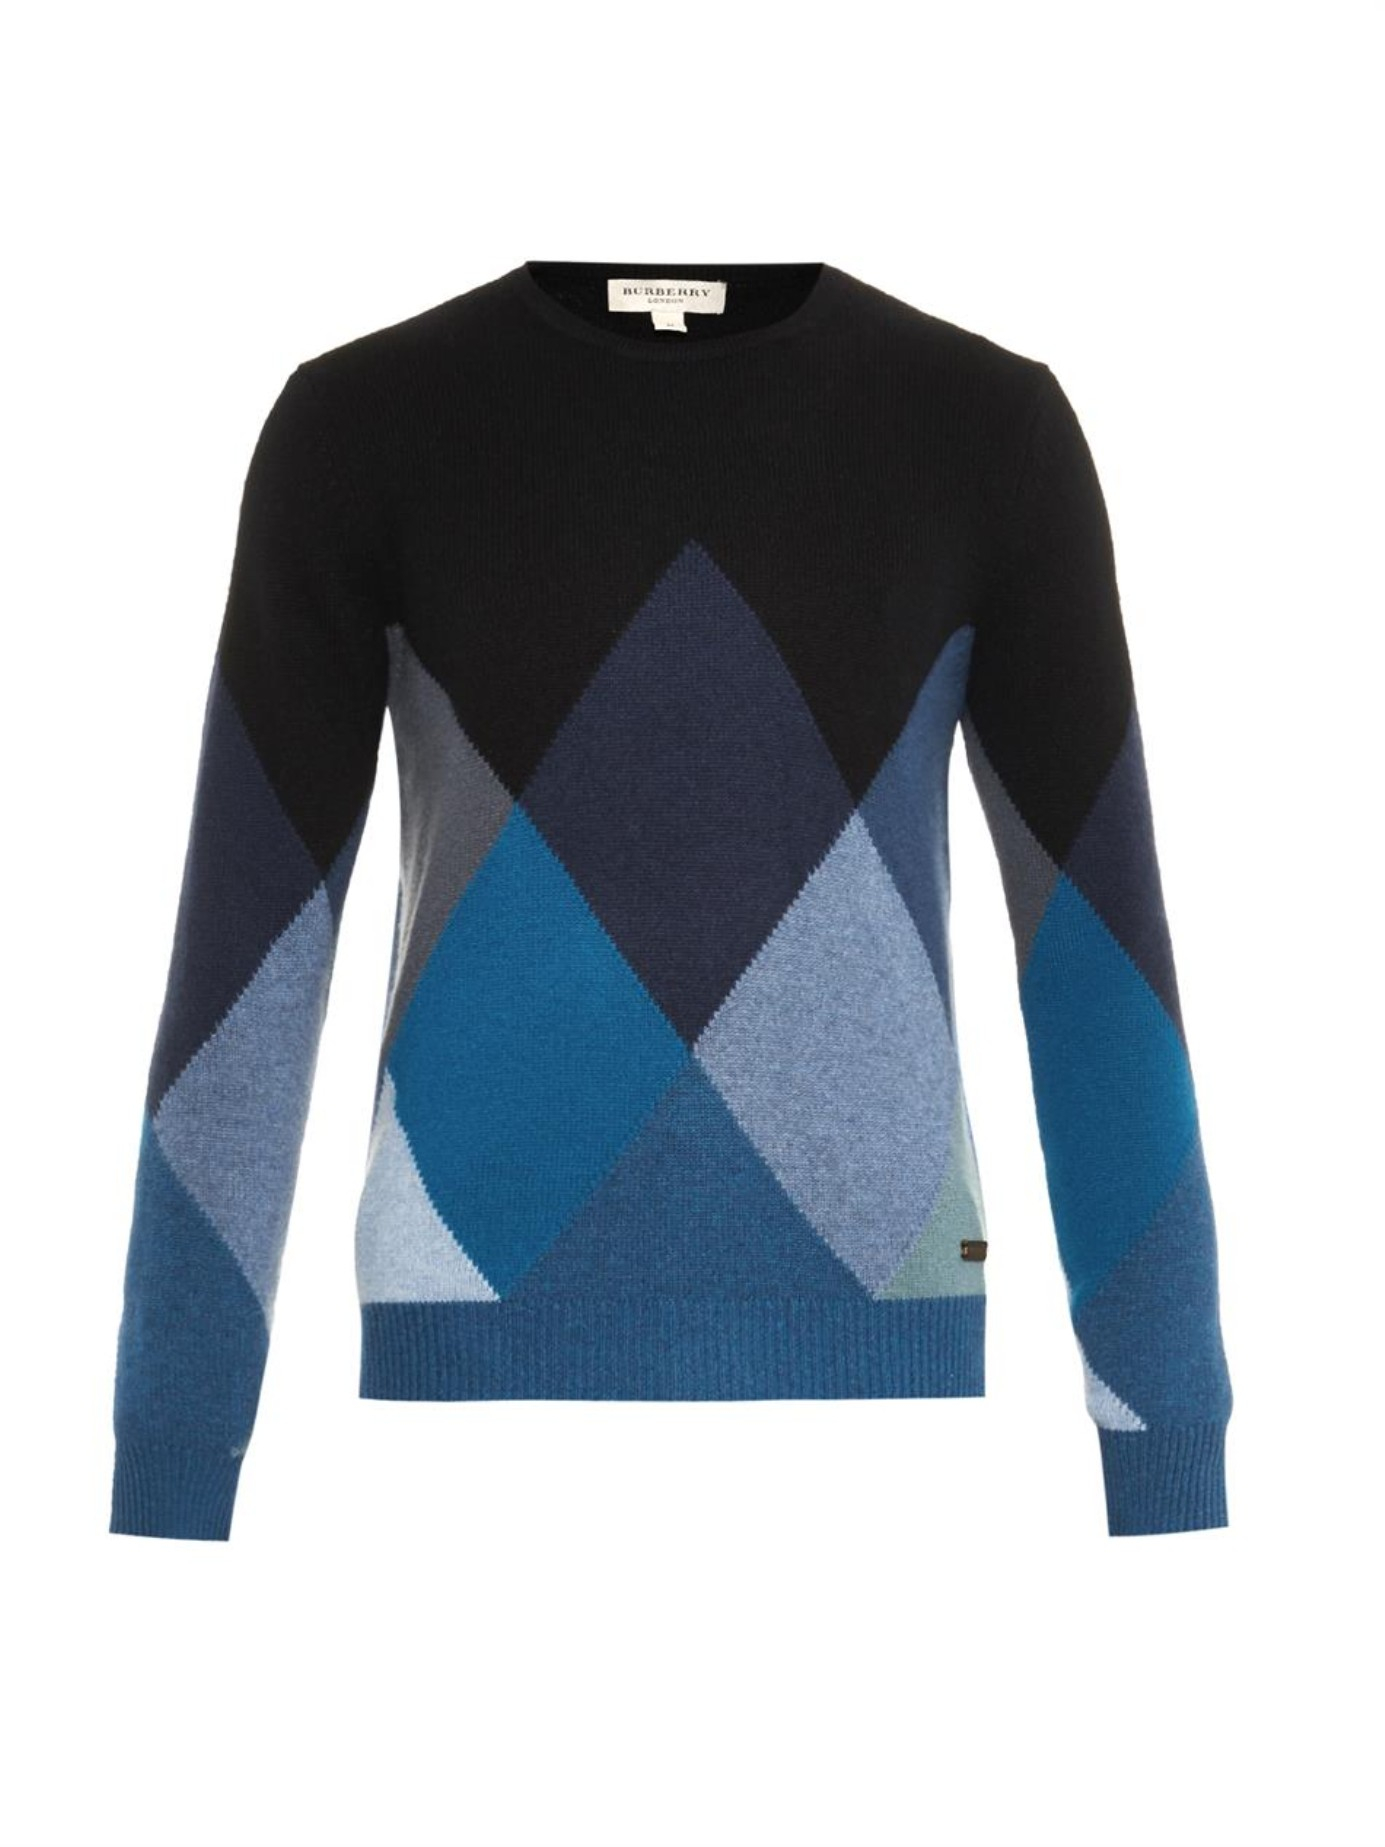 Burberry Northway Argyle Cashmere Sweater in Black for Men | Lyst